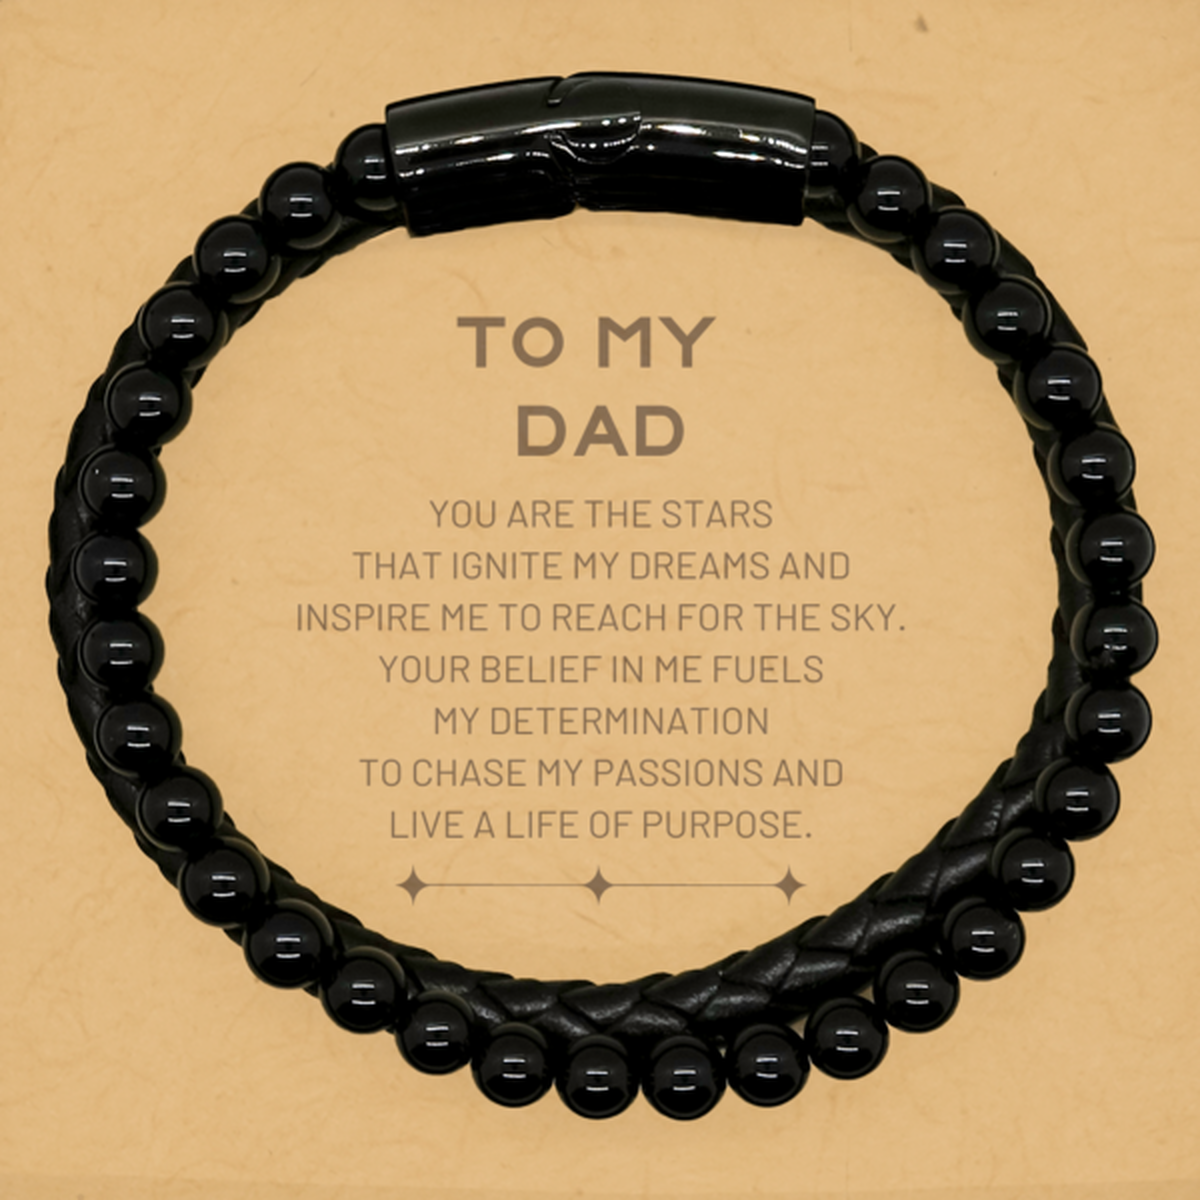 To My Dad Stone Leather Bracelets, You are the stars that ignite my dreams and inspire me to reach for the sky, Birthday Unique Gifts For Dad, Thank You Gifts For Dad